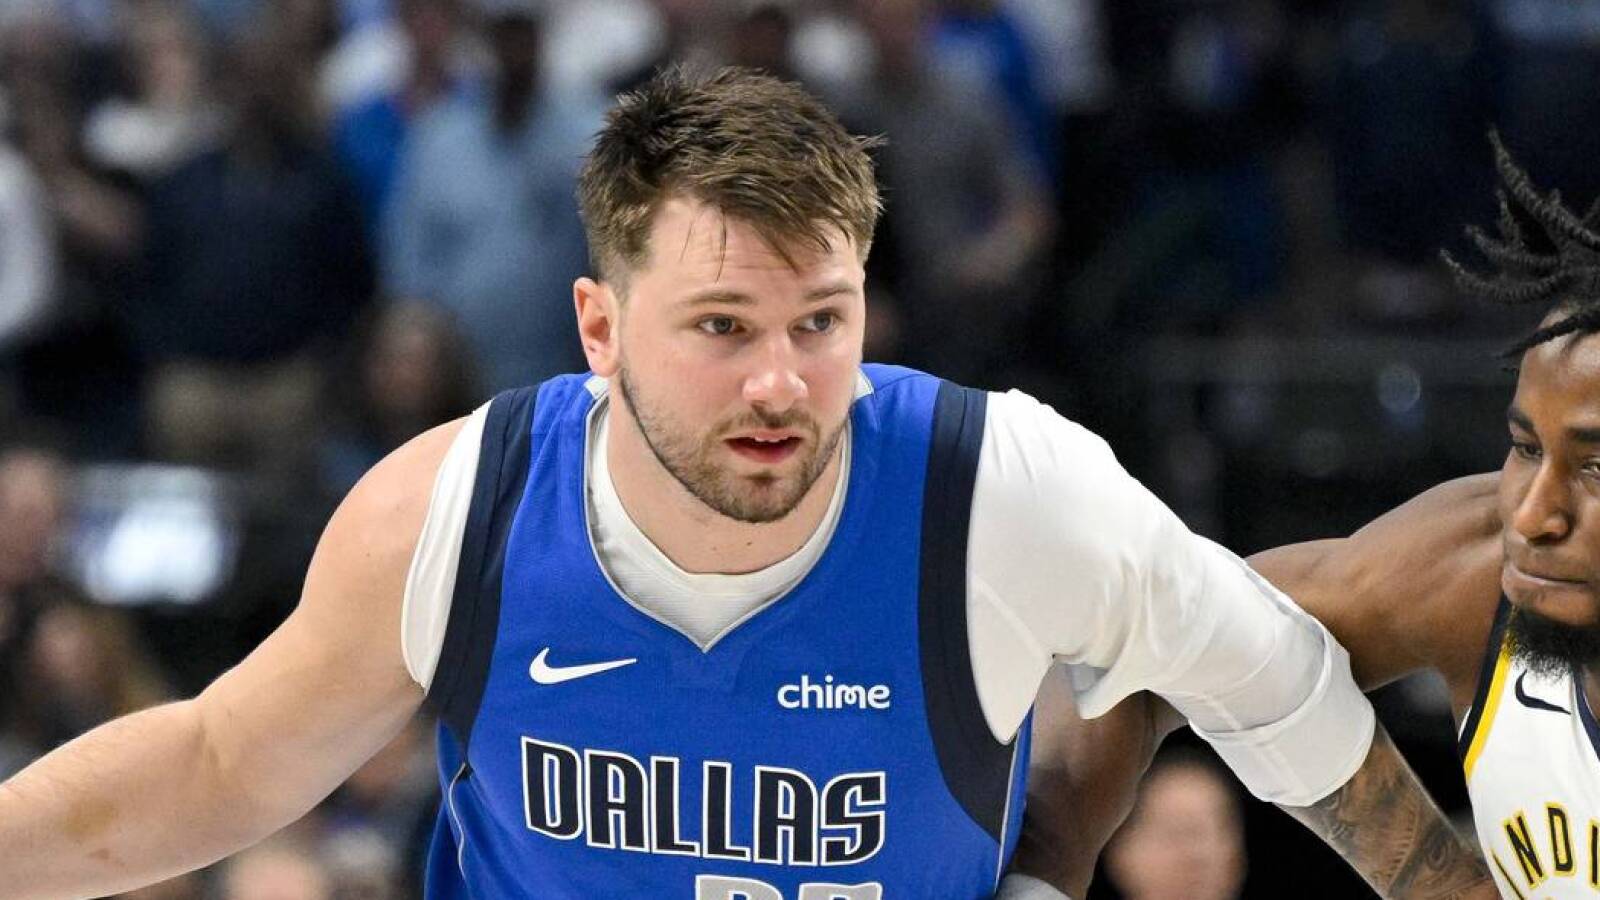 Watch: Angry Luka Doncic throws bottle during latest loss